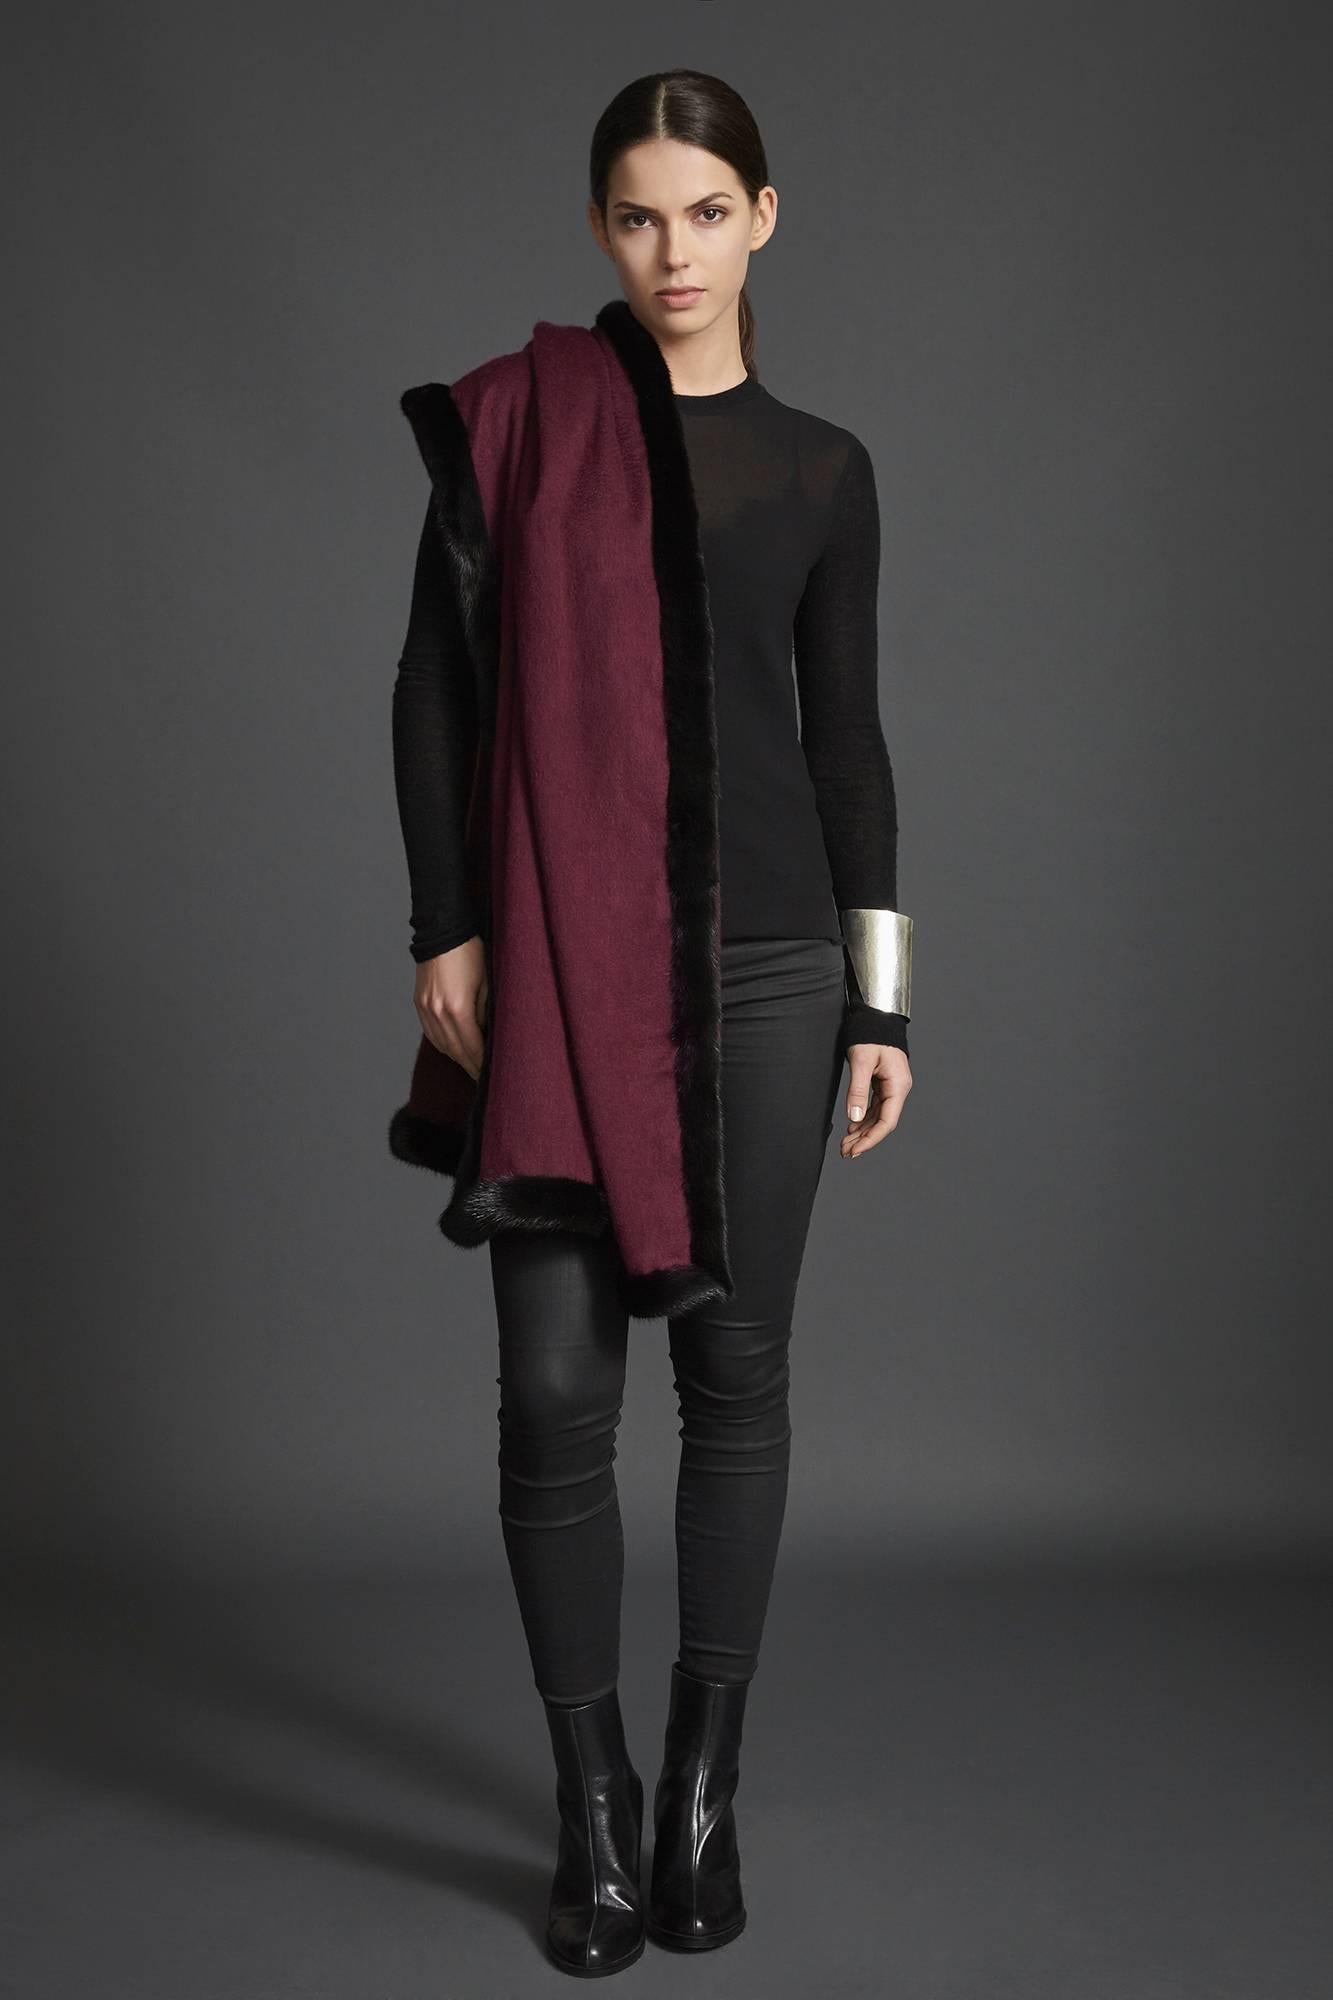 Verheyen London Mink Fur Trimmed Black & Burgundy Cashmere Shawl 

Verheyen London’s shawl is spun from the finest Scottish woven cashmere and finished with the most exquisite dyed mink. Its warmth envelopes you with luxury, perfect for travel and